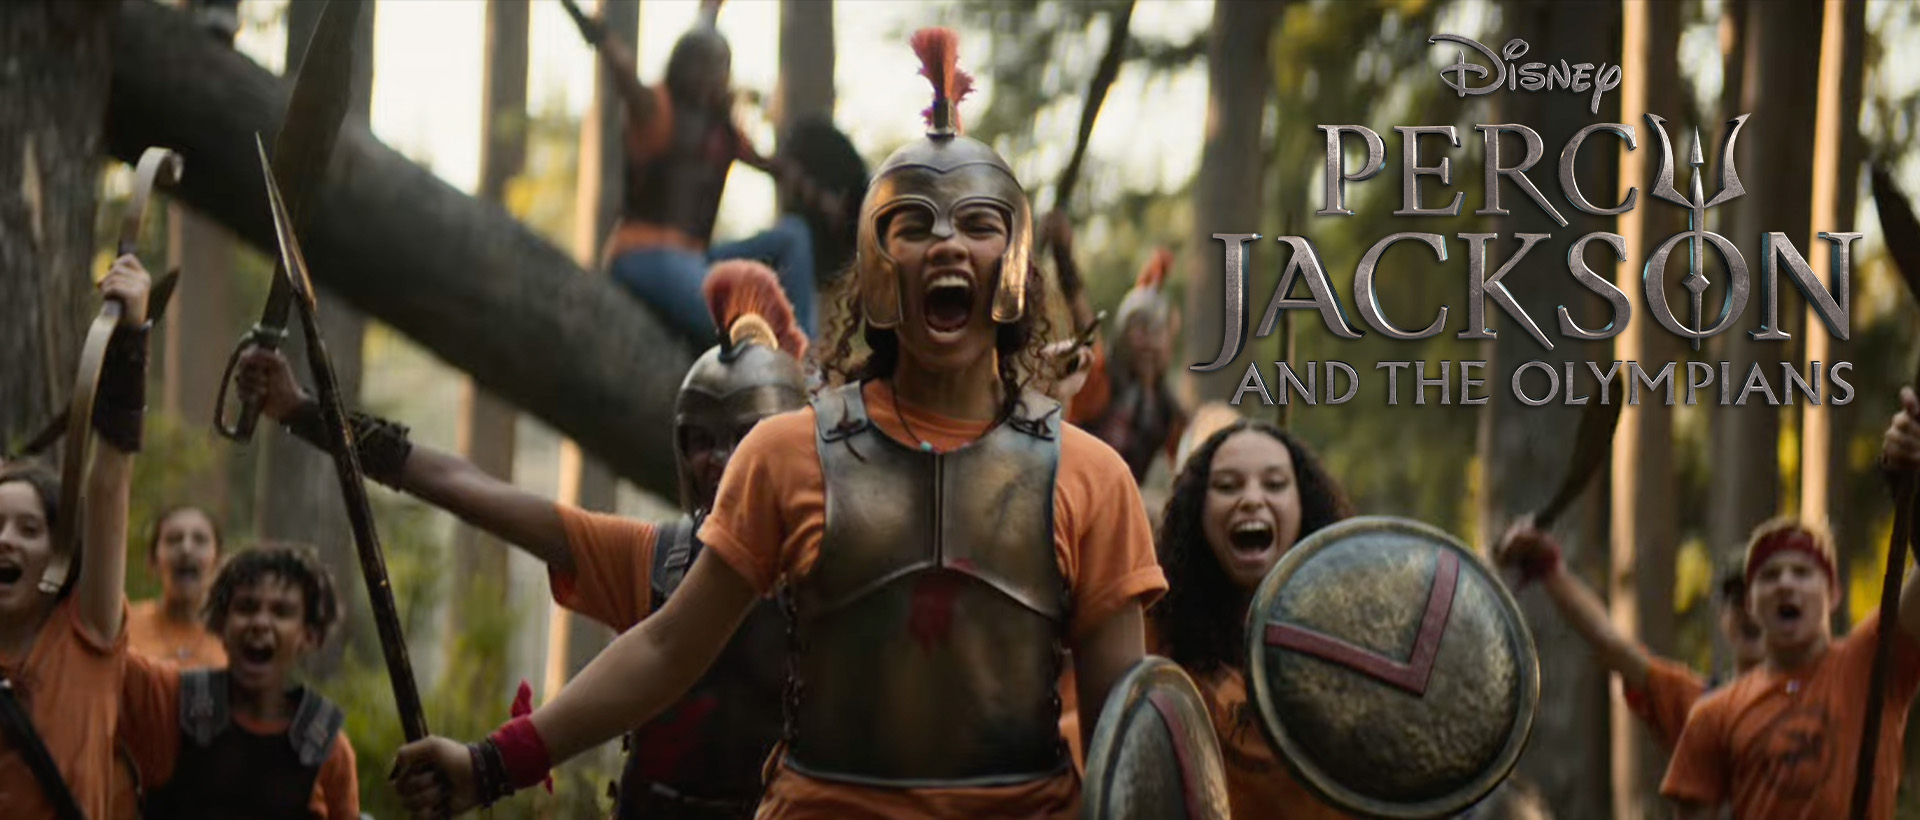 Percy Jackson trailer review: I actually want to be a half-blood